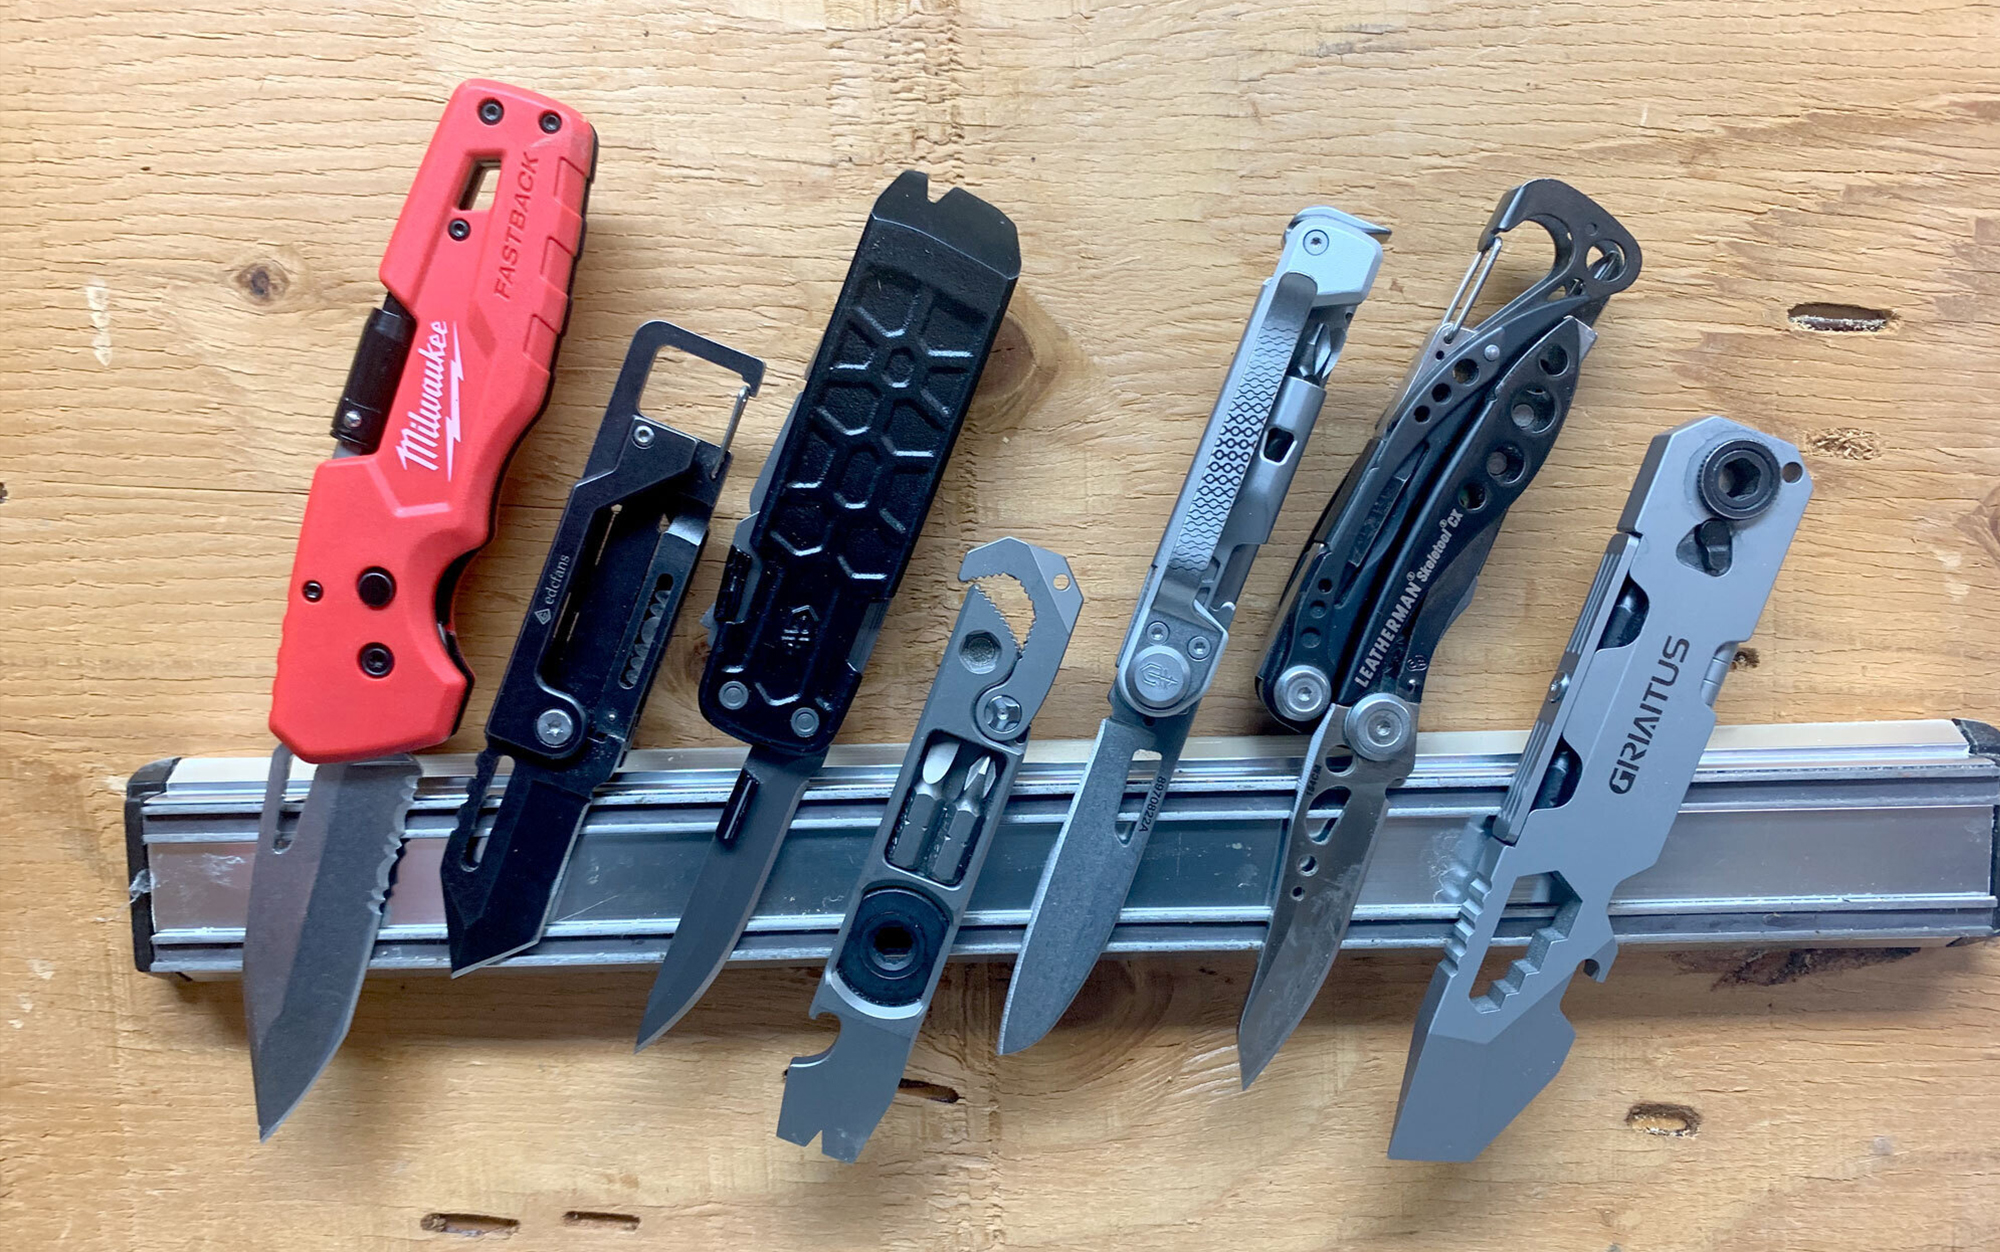 We tested the best EDC multi tools.